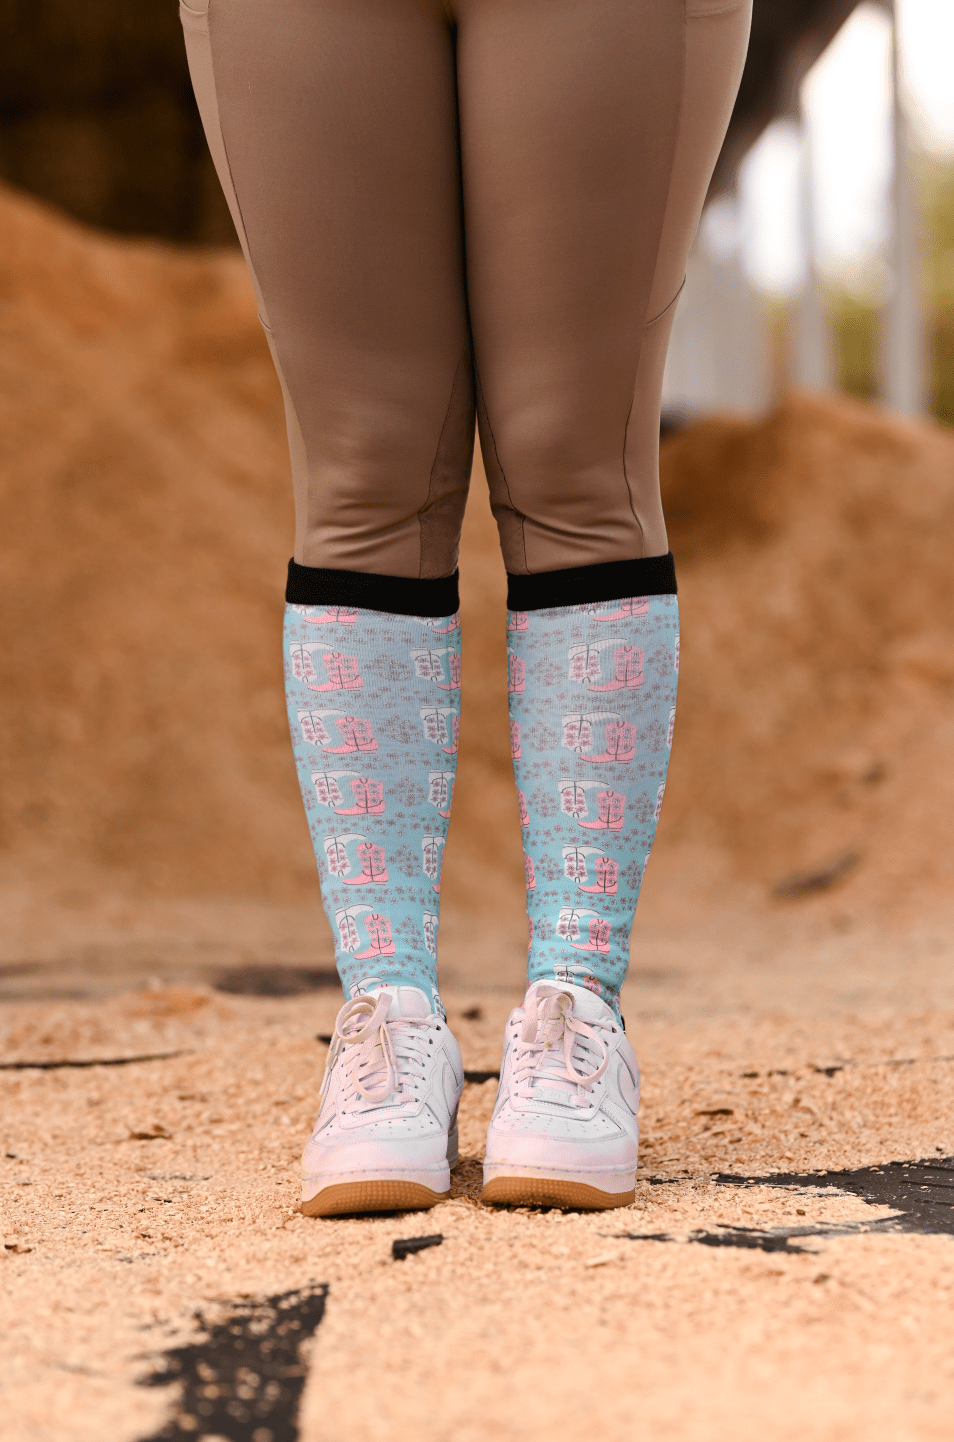 dreamers & schemers Pair & A Spare These Boots Pair & a Spare equestrian boot socks boot socks thin socks riding socks pattern socks tall socks funny socks knee high socks horse socks horse show socks